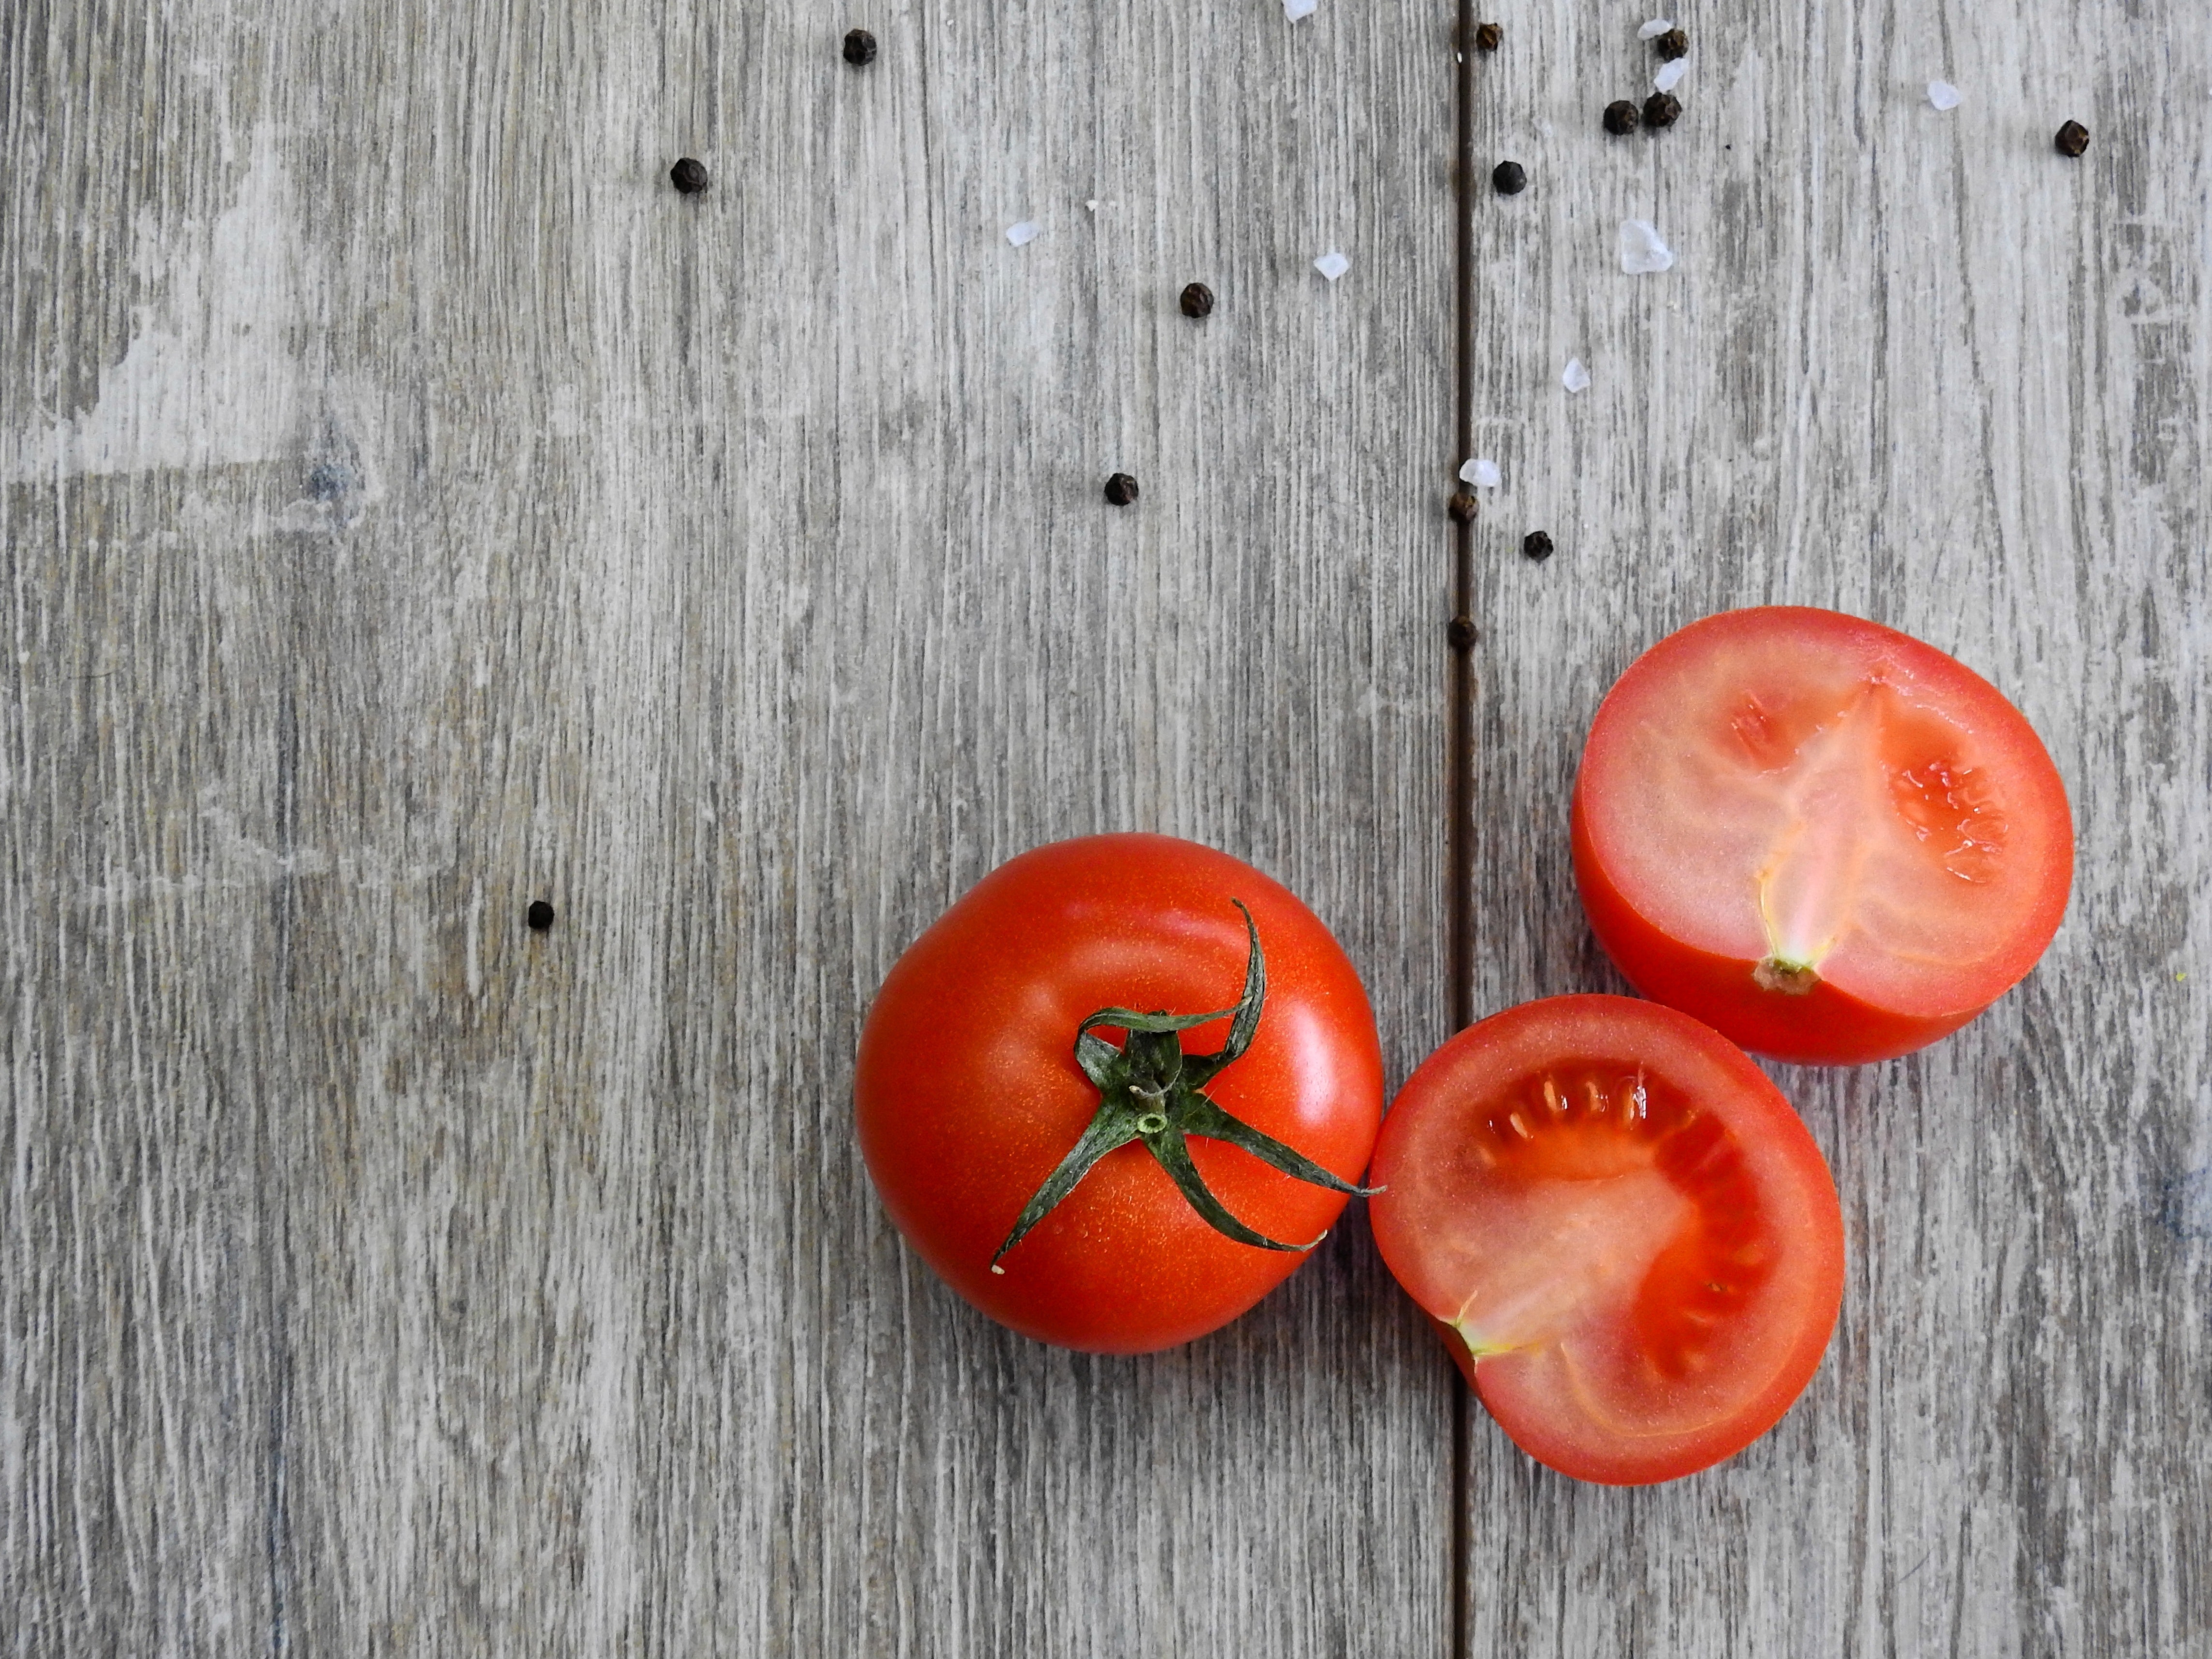 Creating Unique Tomatoes Through Breeding: The Benefits of Open-Pollinated & Hybrid Varieties